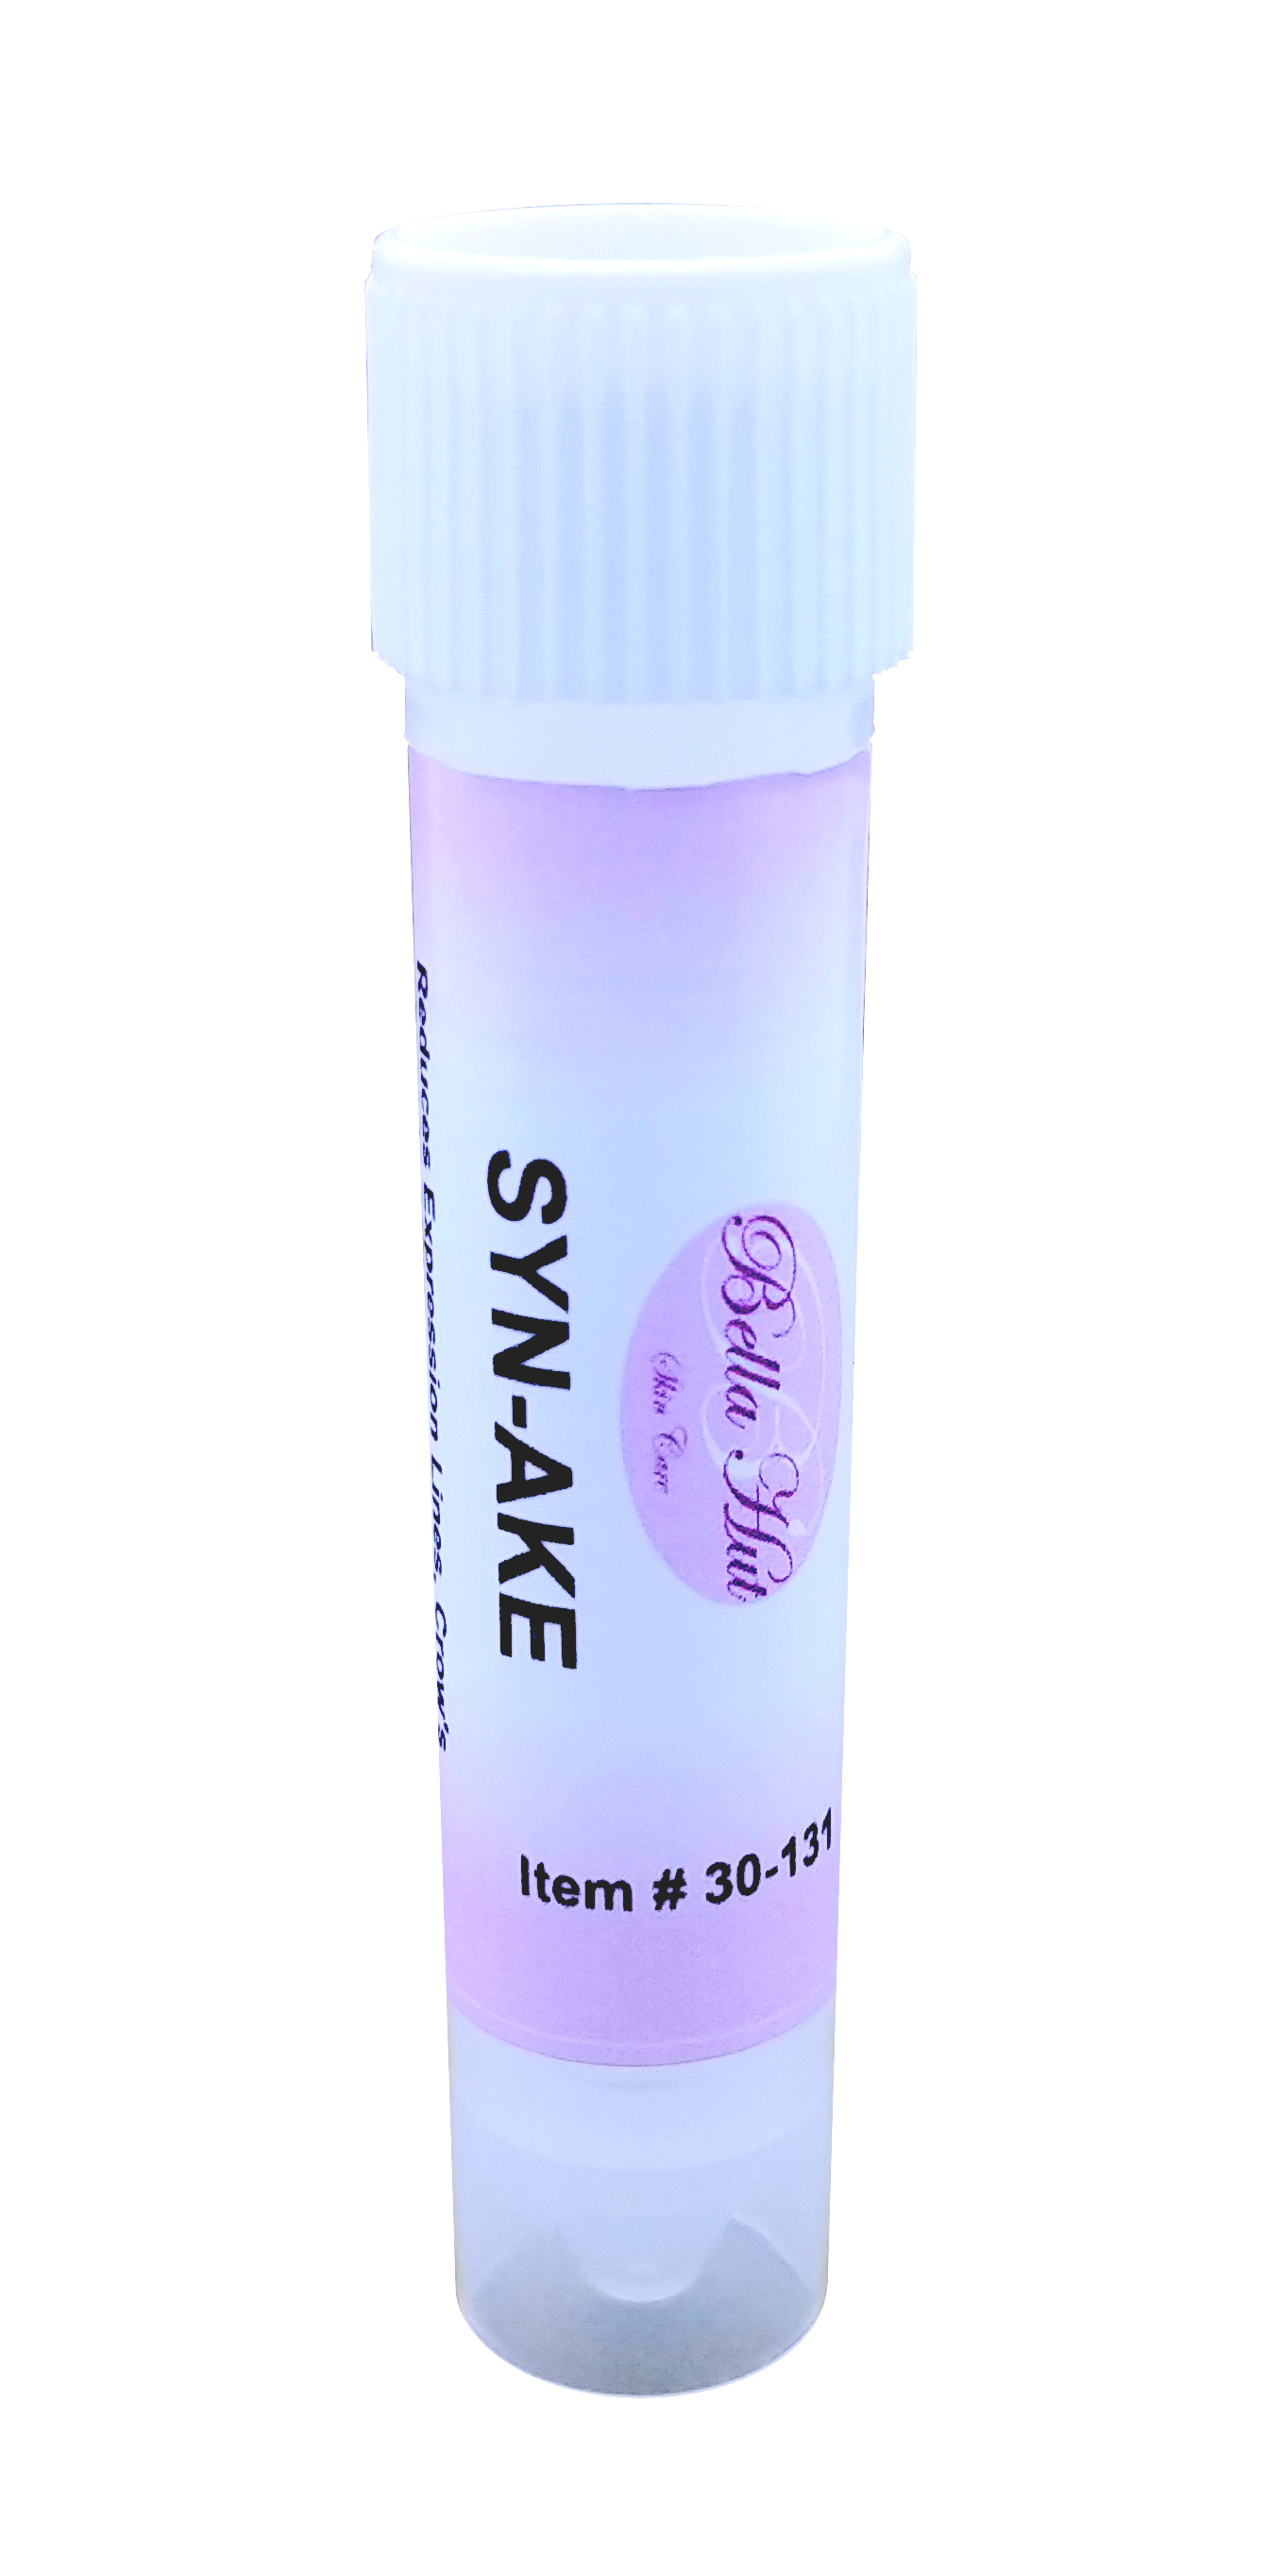 Pure SYN-AKE peptide additive for mixing cream or serum